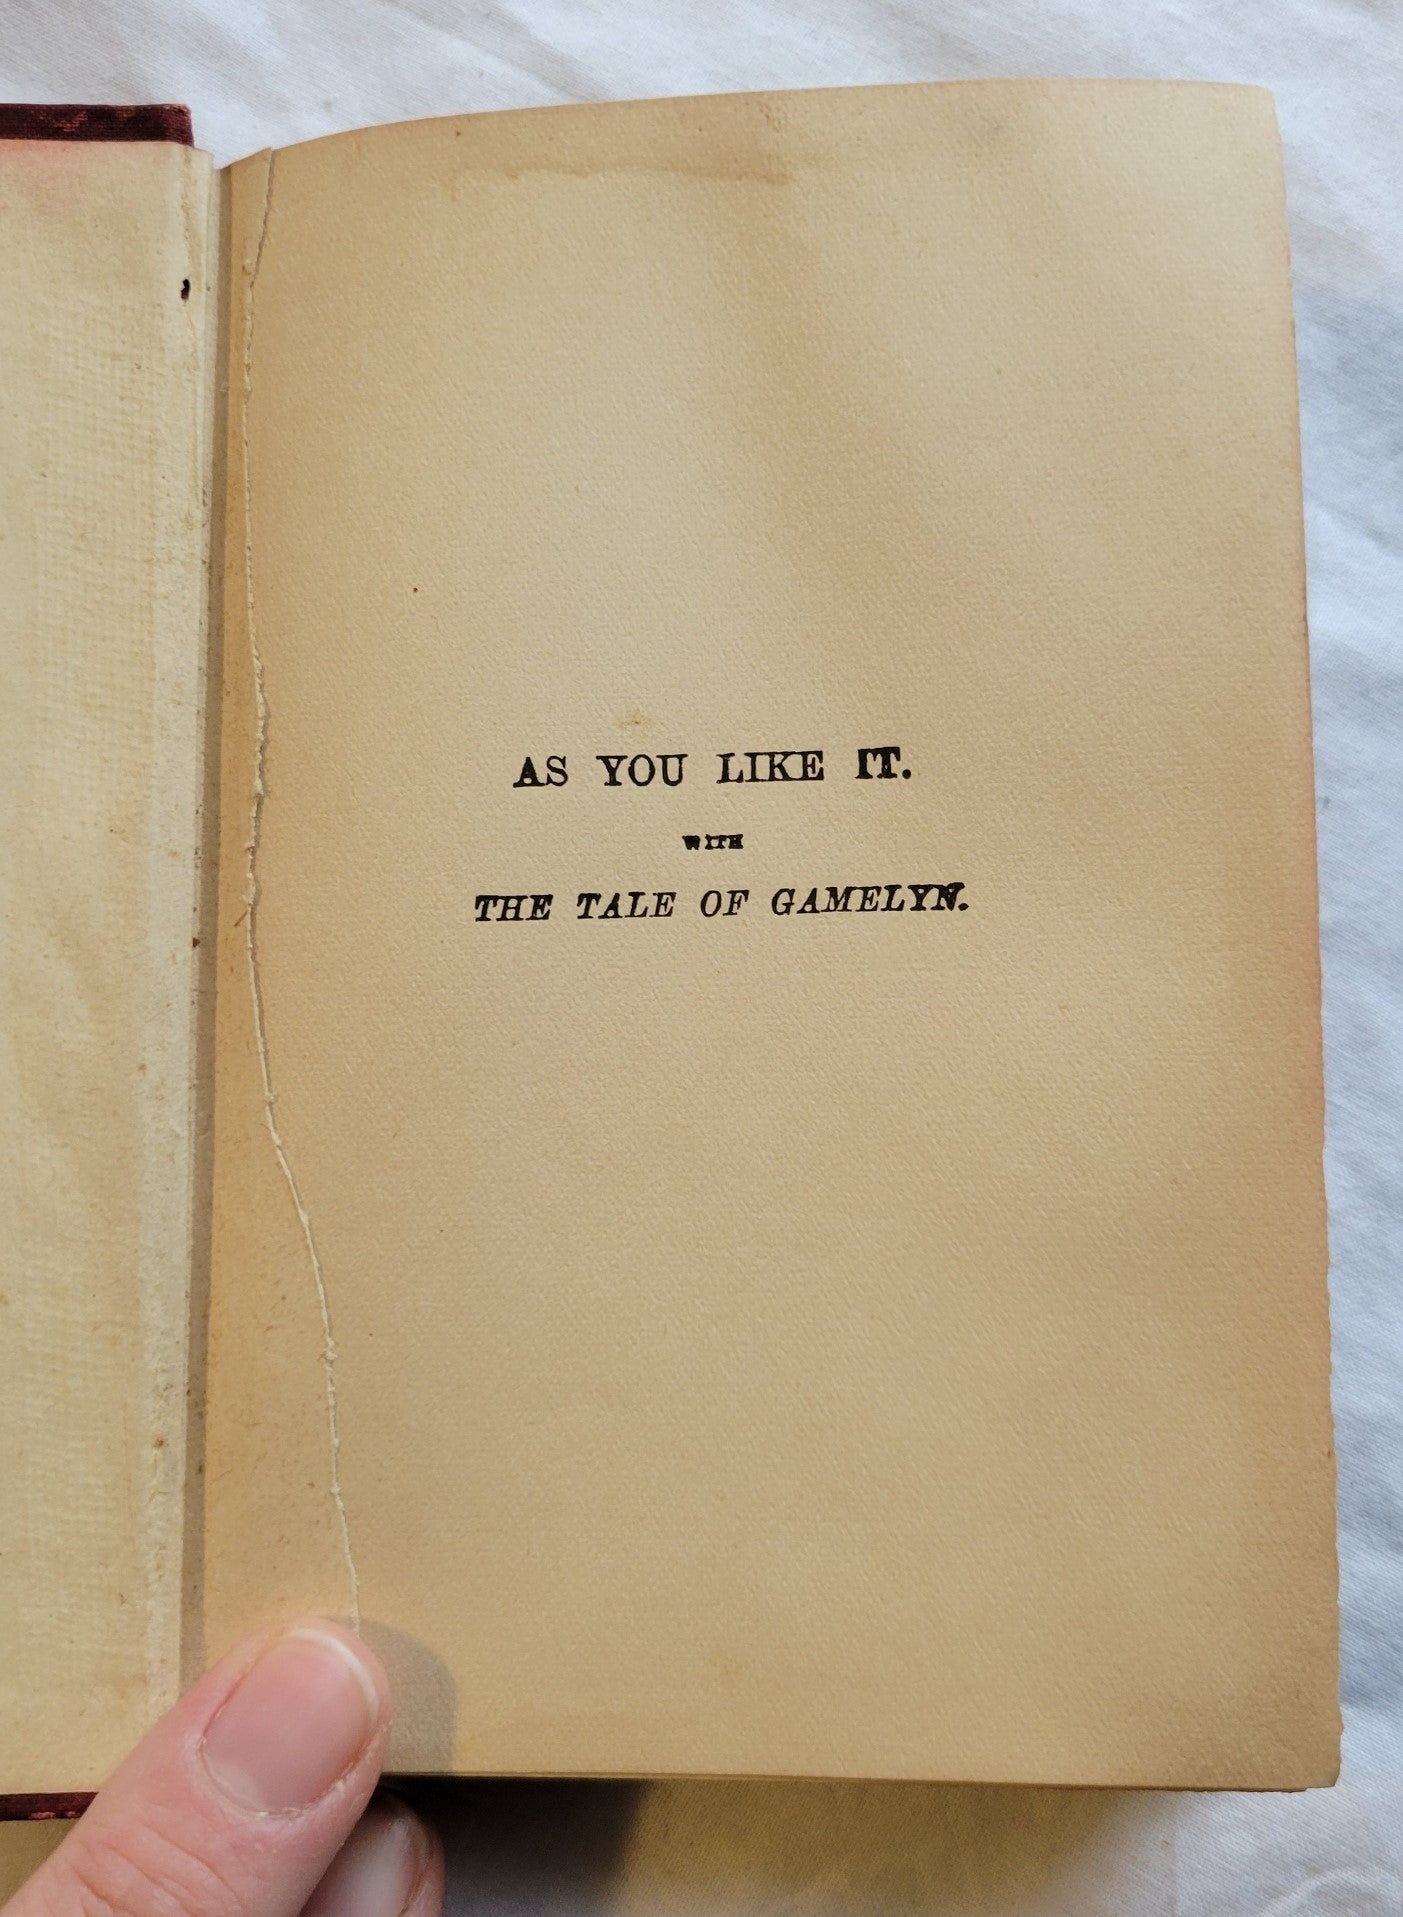 "As You Like It" by William Shakespeare, published by E. A. Lawson Company Publishers, printing date unknown but believed to be around the late 1800s.  View of inside title page.